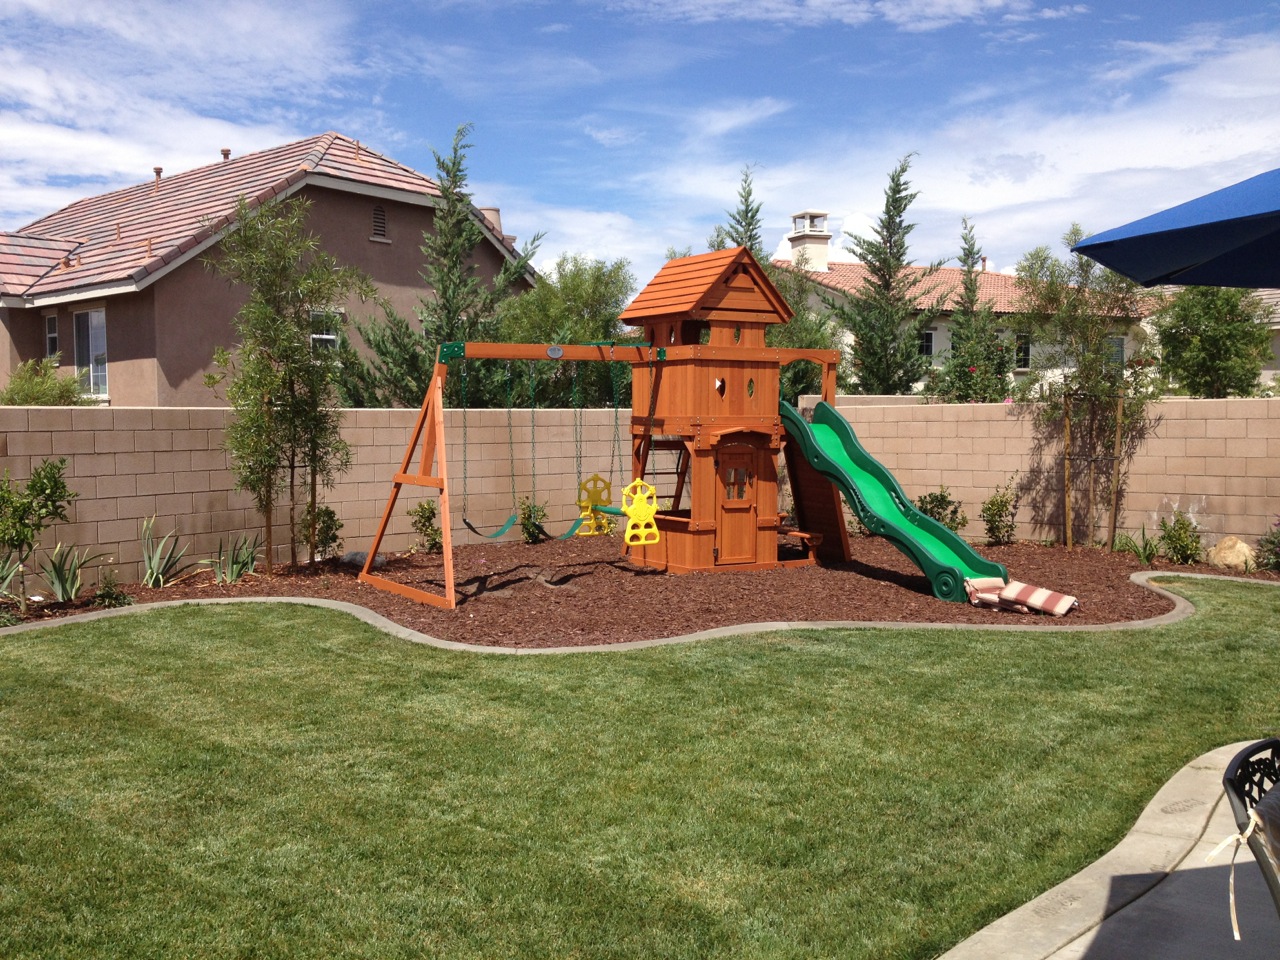 Playset for children in a fenced in backyard.